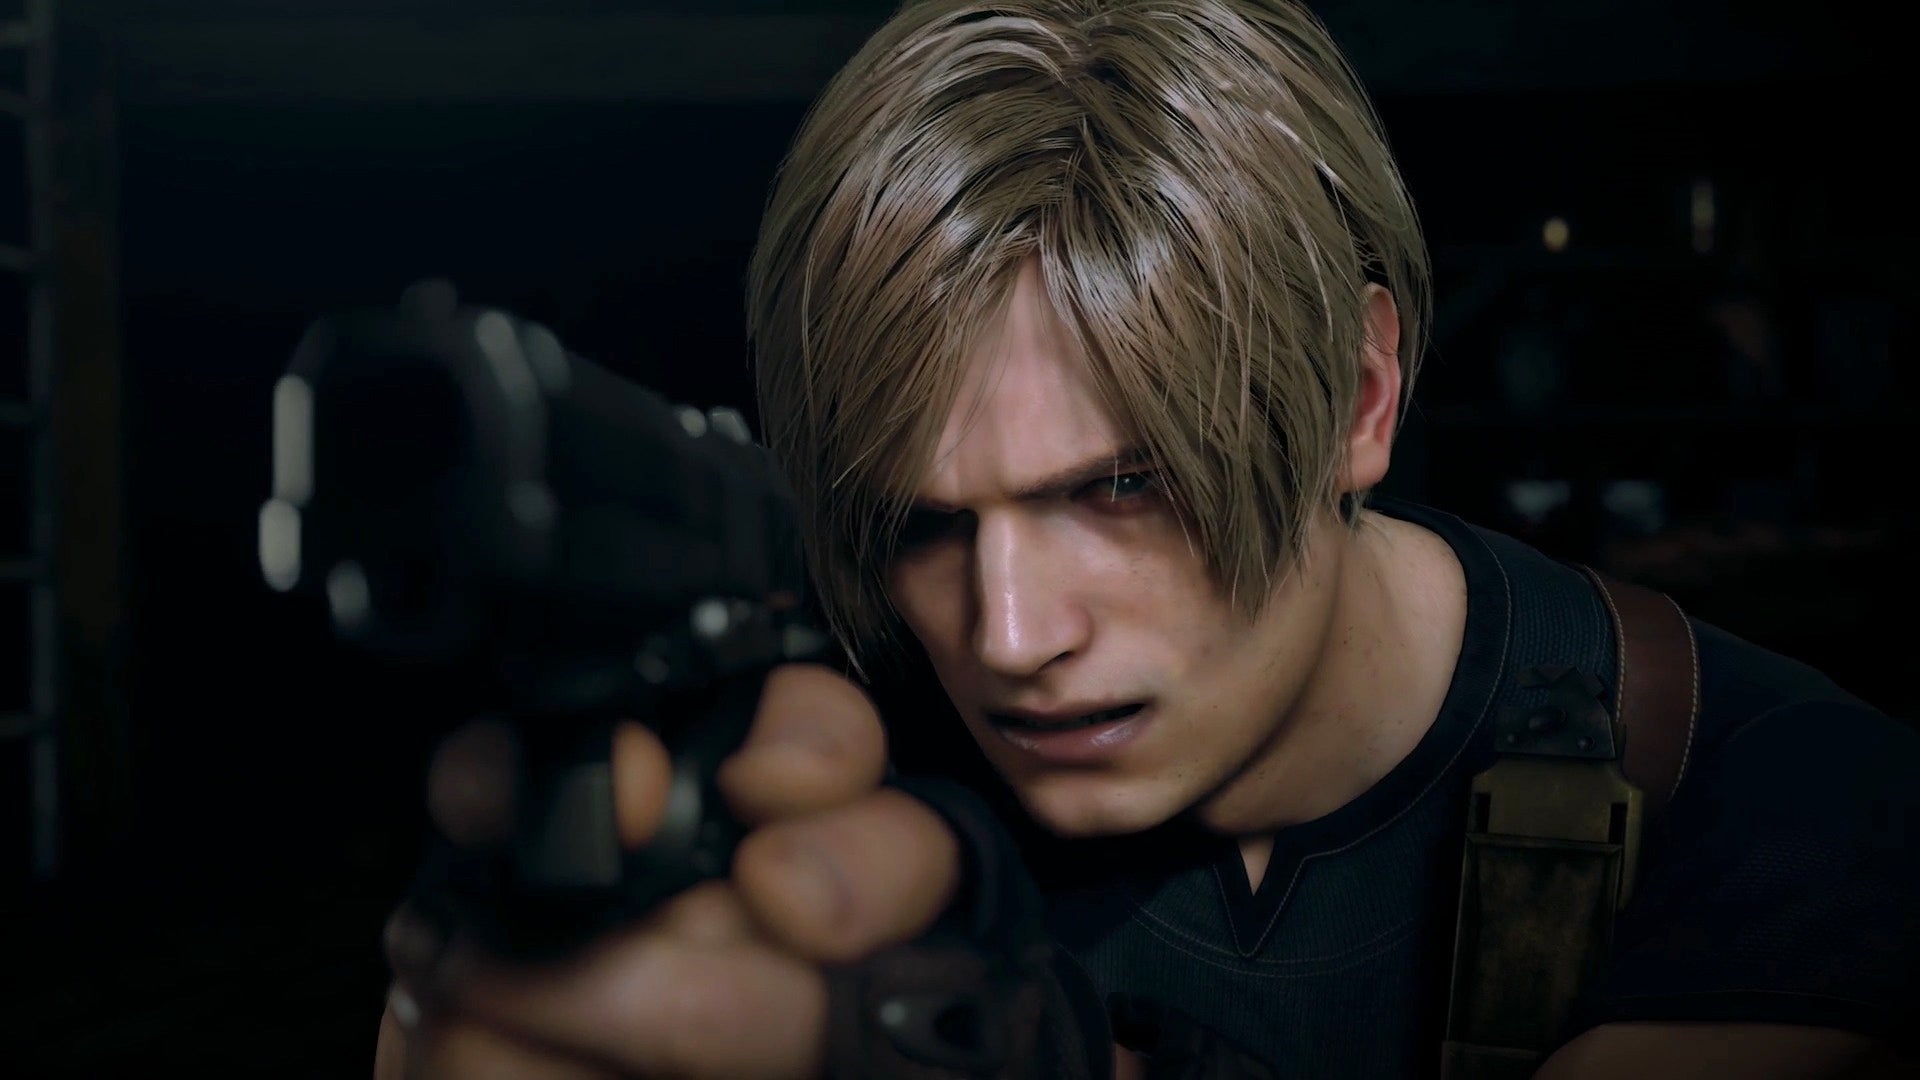 What The Resident Evil 4 Remake Means for Code Veronica